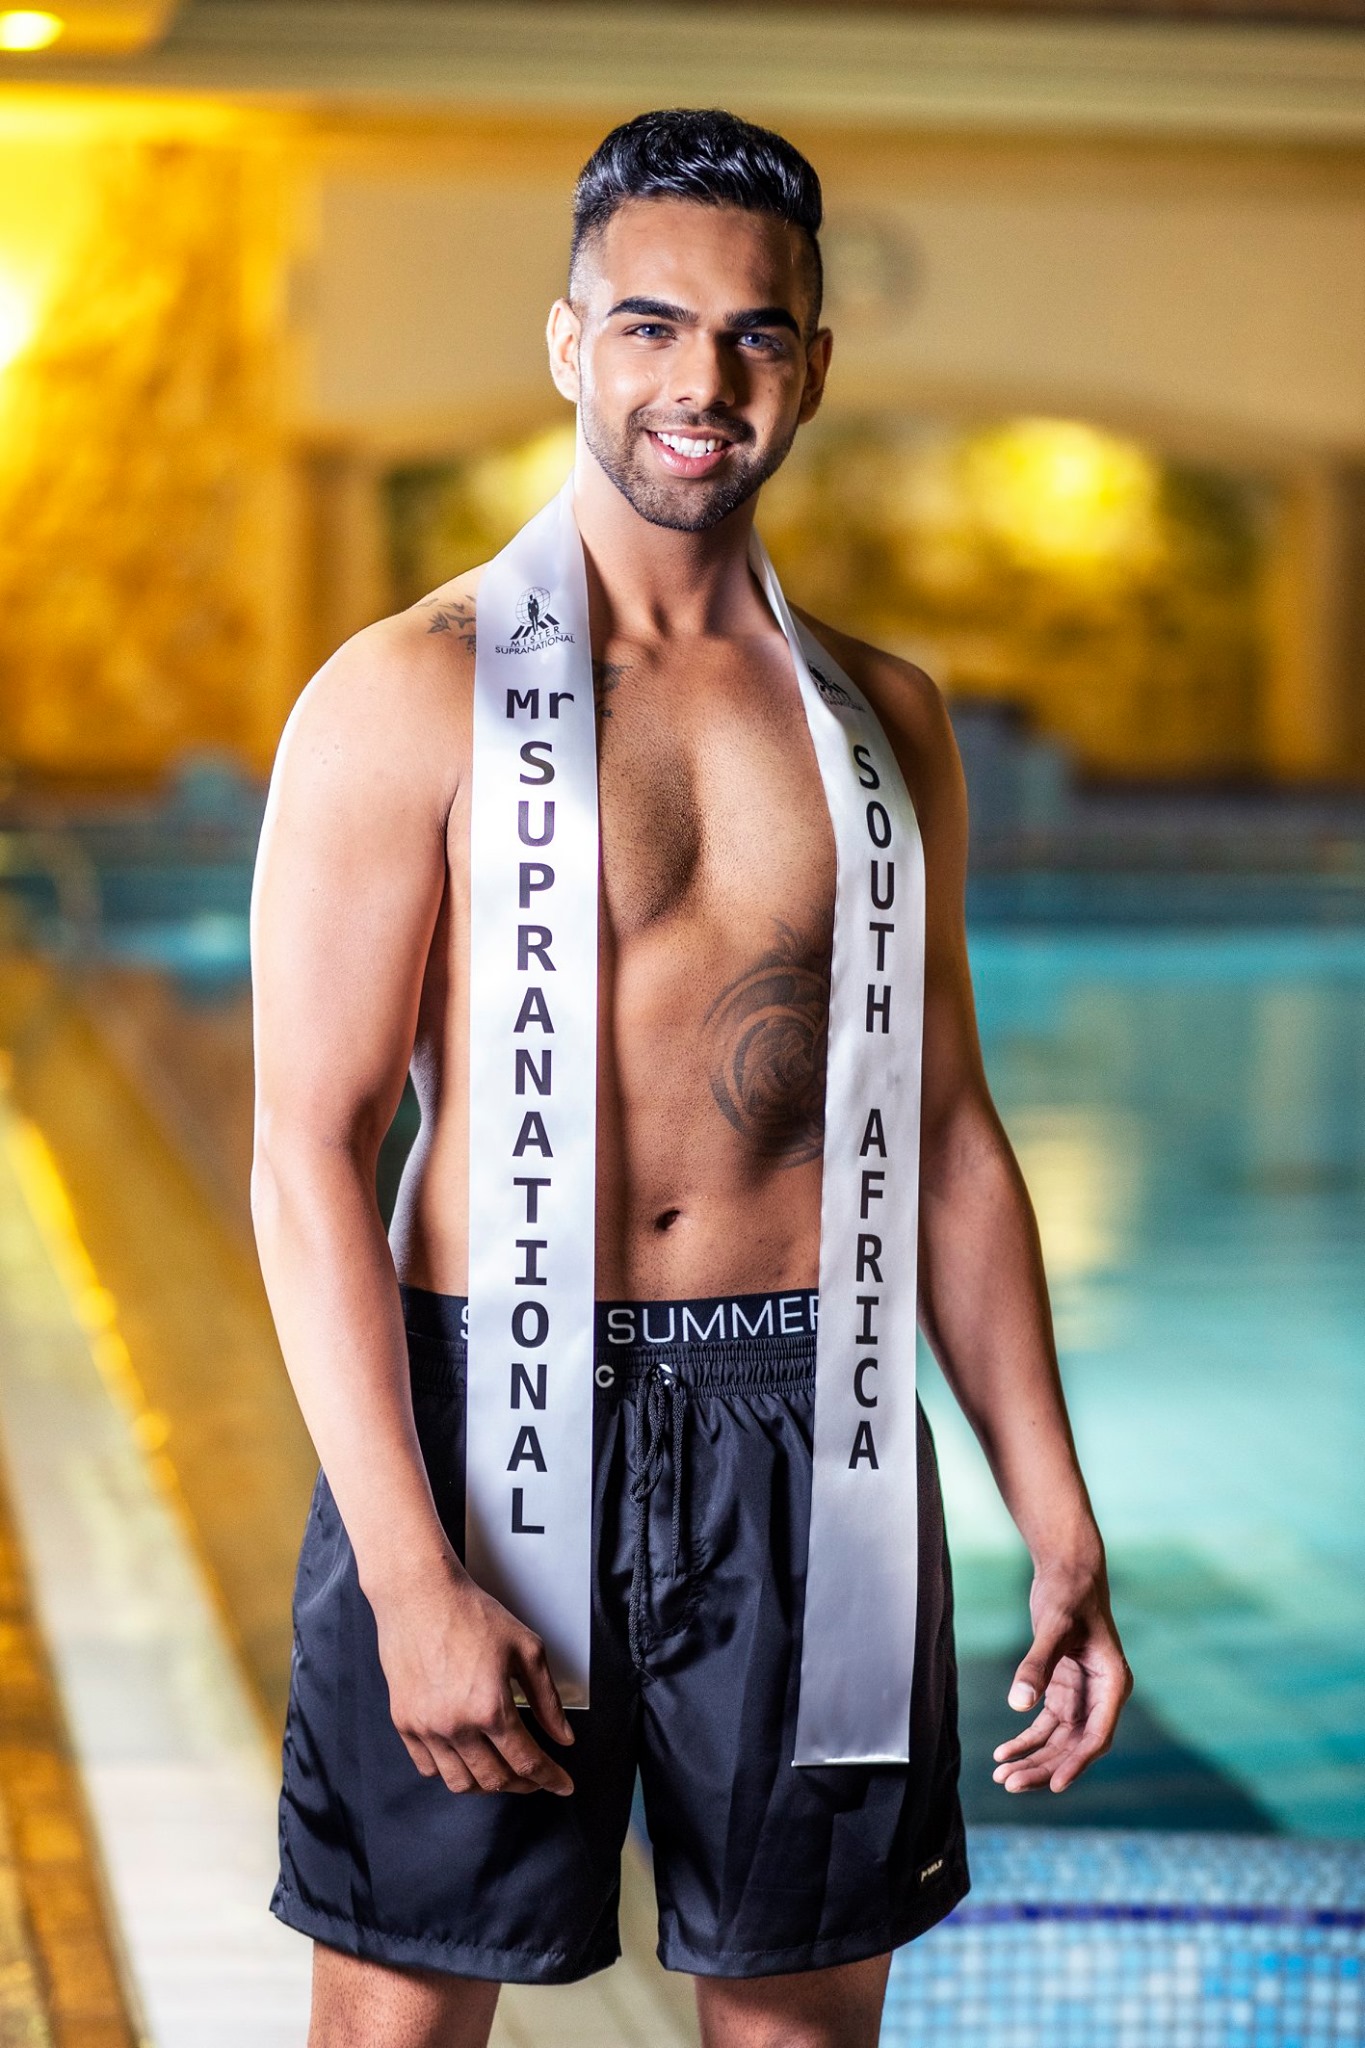 Mister Supranational 2019 Official Swimwear 0016